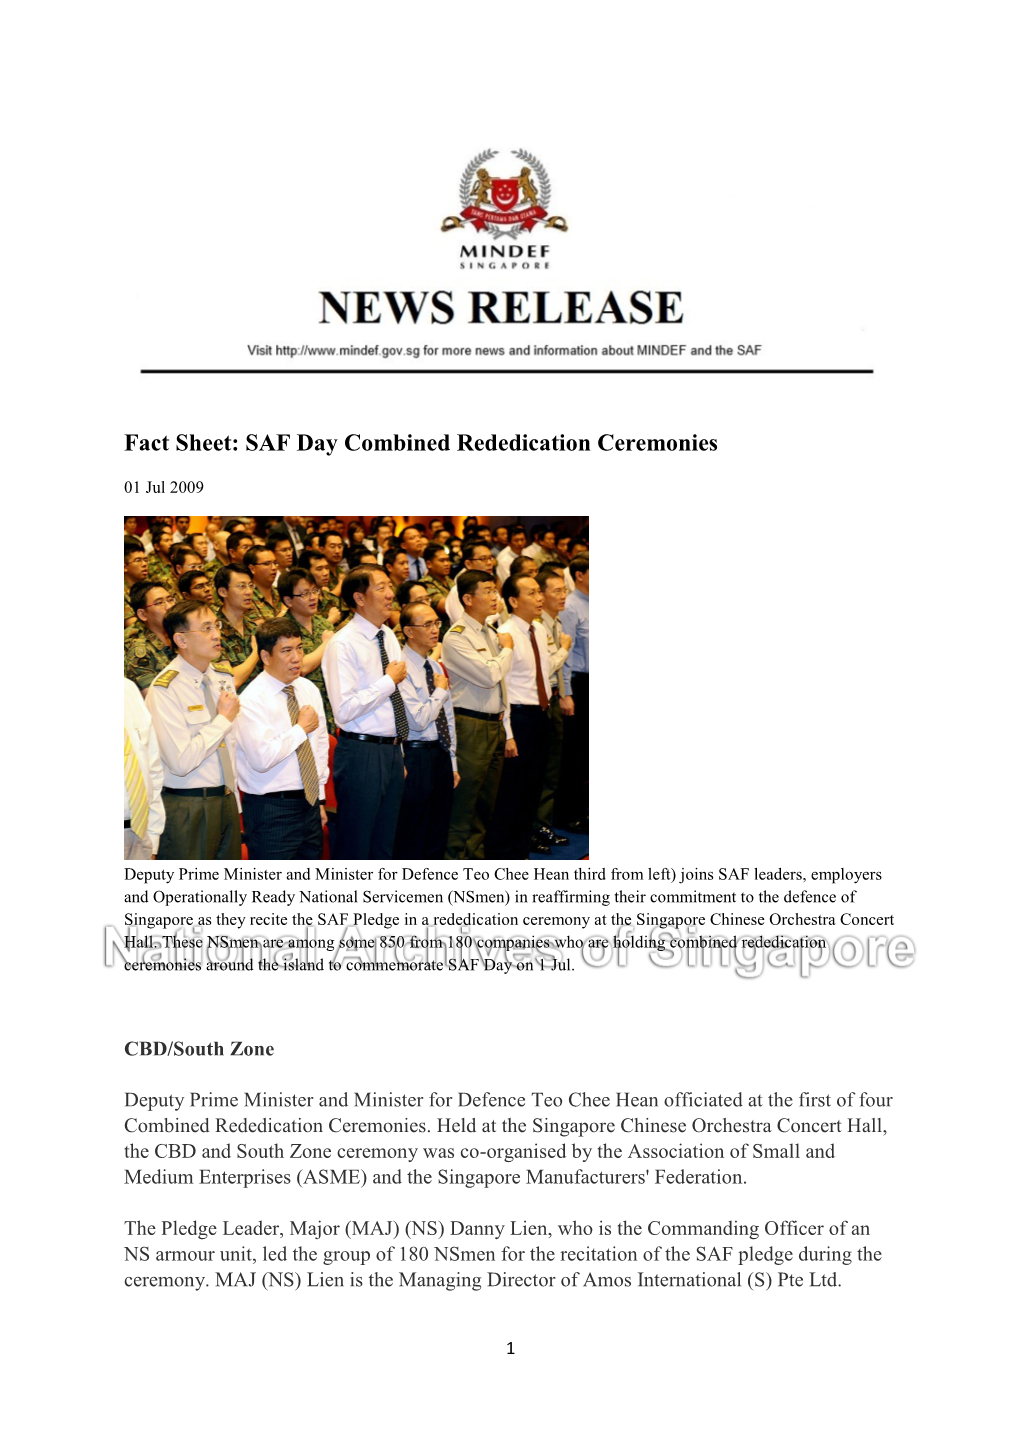 Fact Sheet: SAF Day Combined Rededication Ceremonies